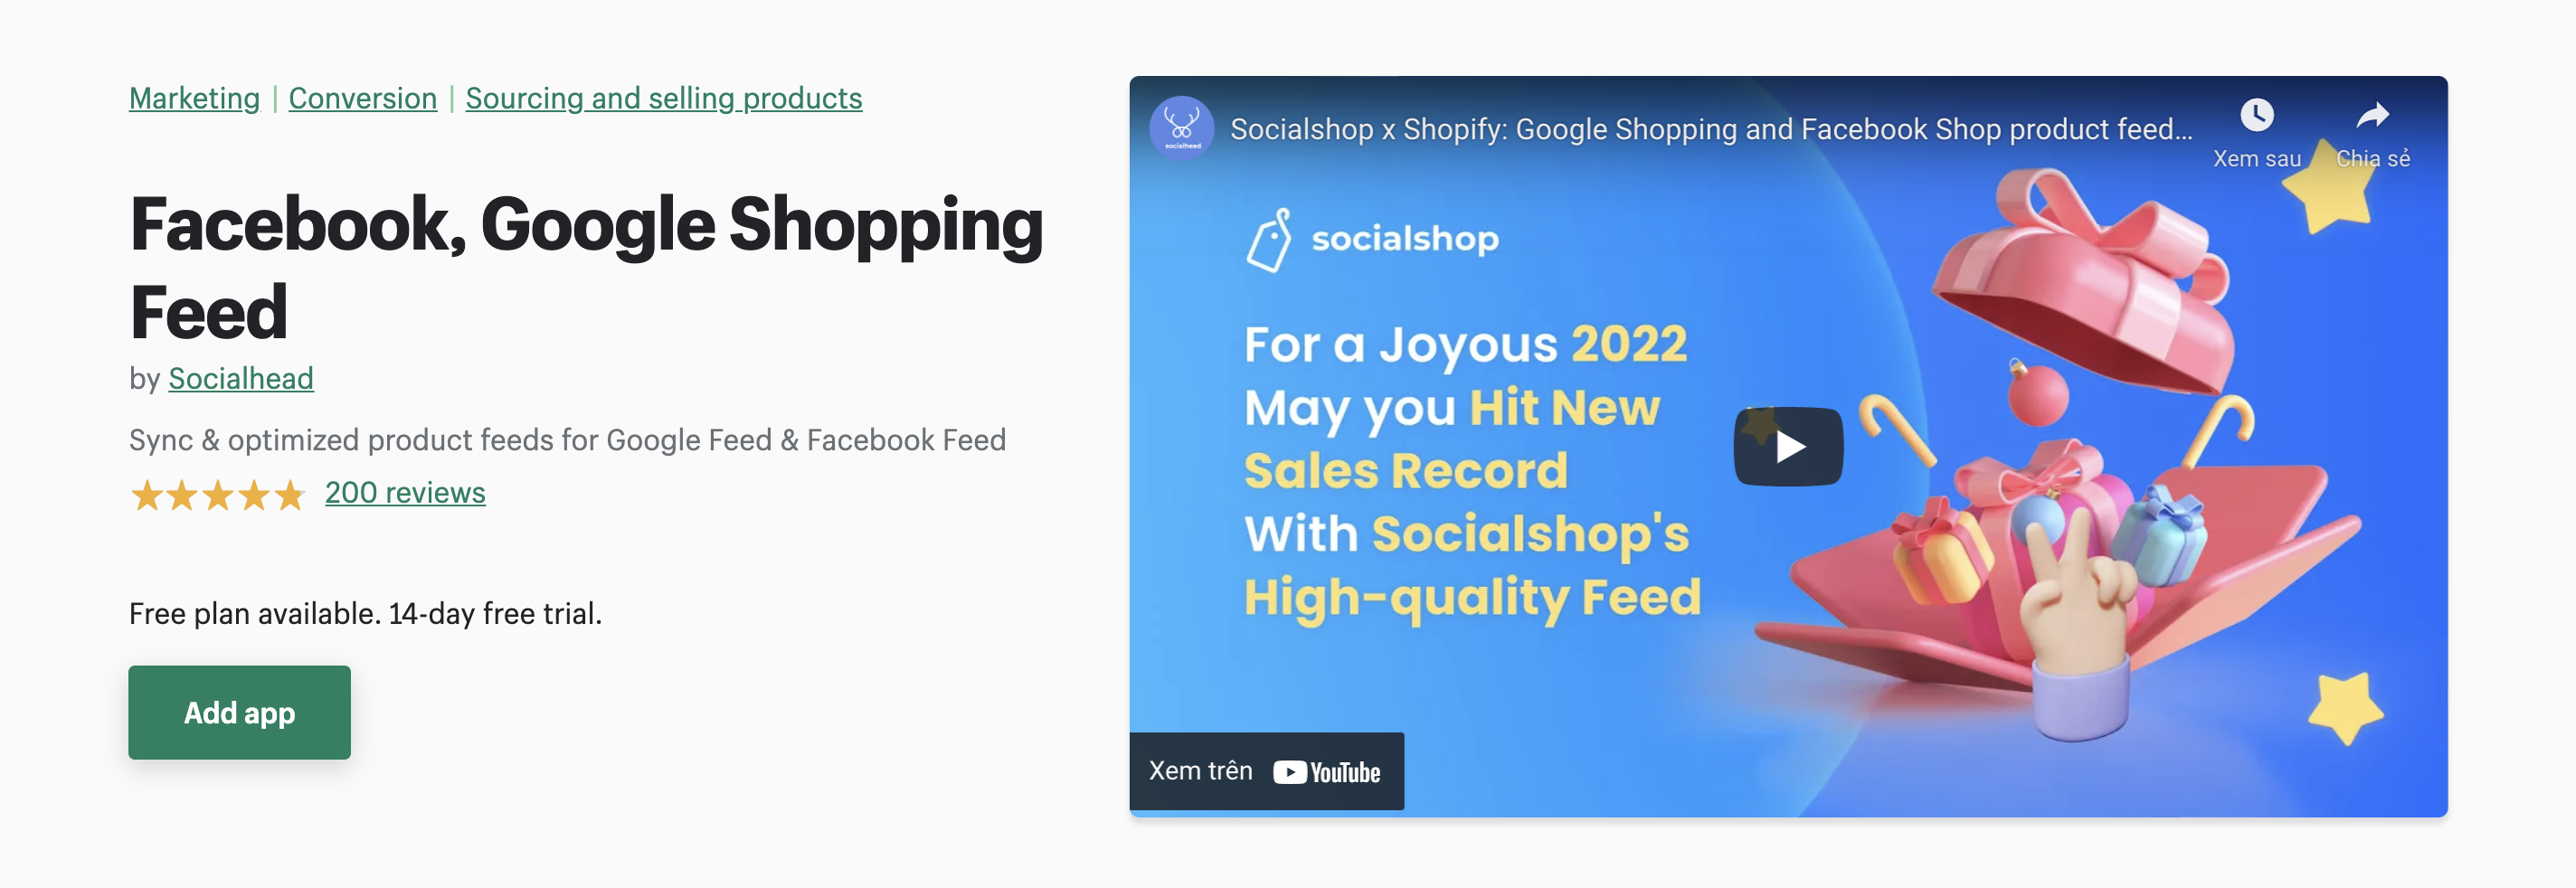 With Socialshop, you can sync products to a new level